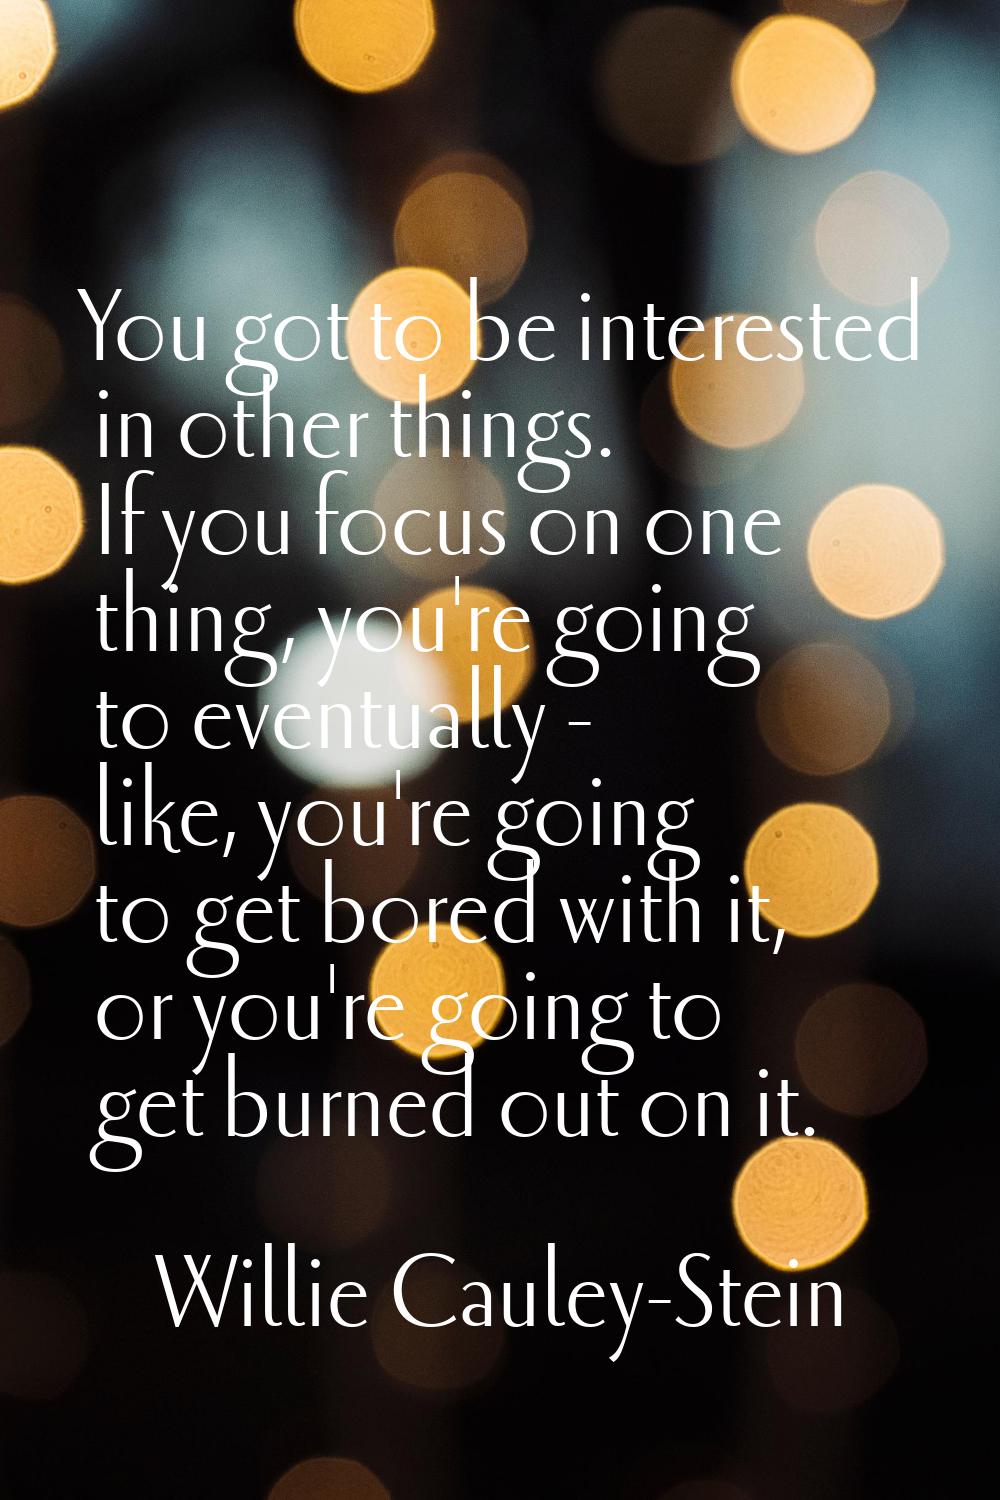 You got to be interested in other things. If you focus on one thing, you're going to eventually - l